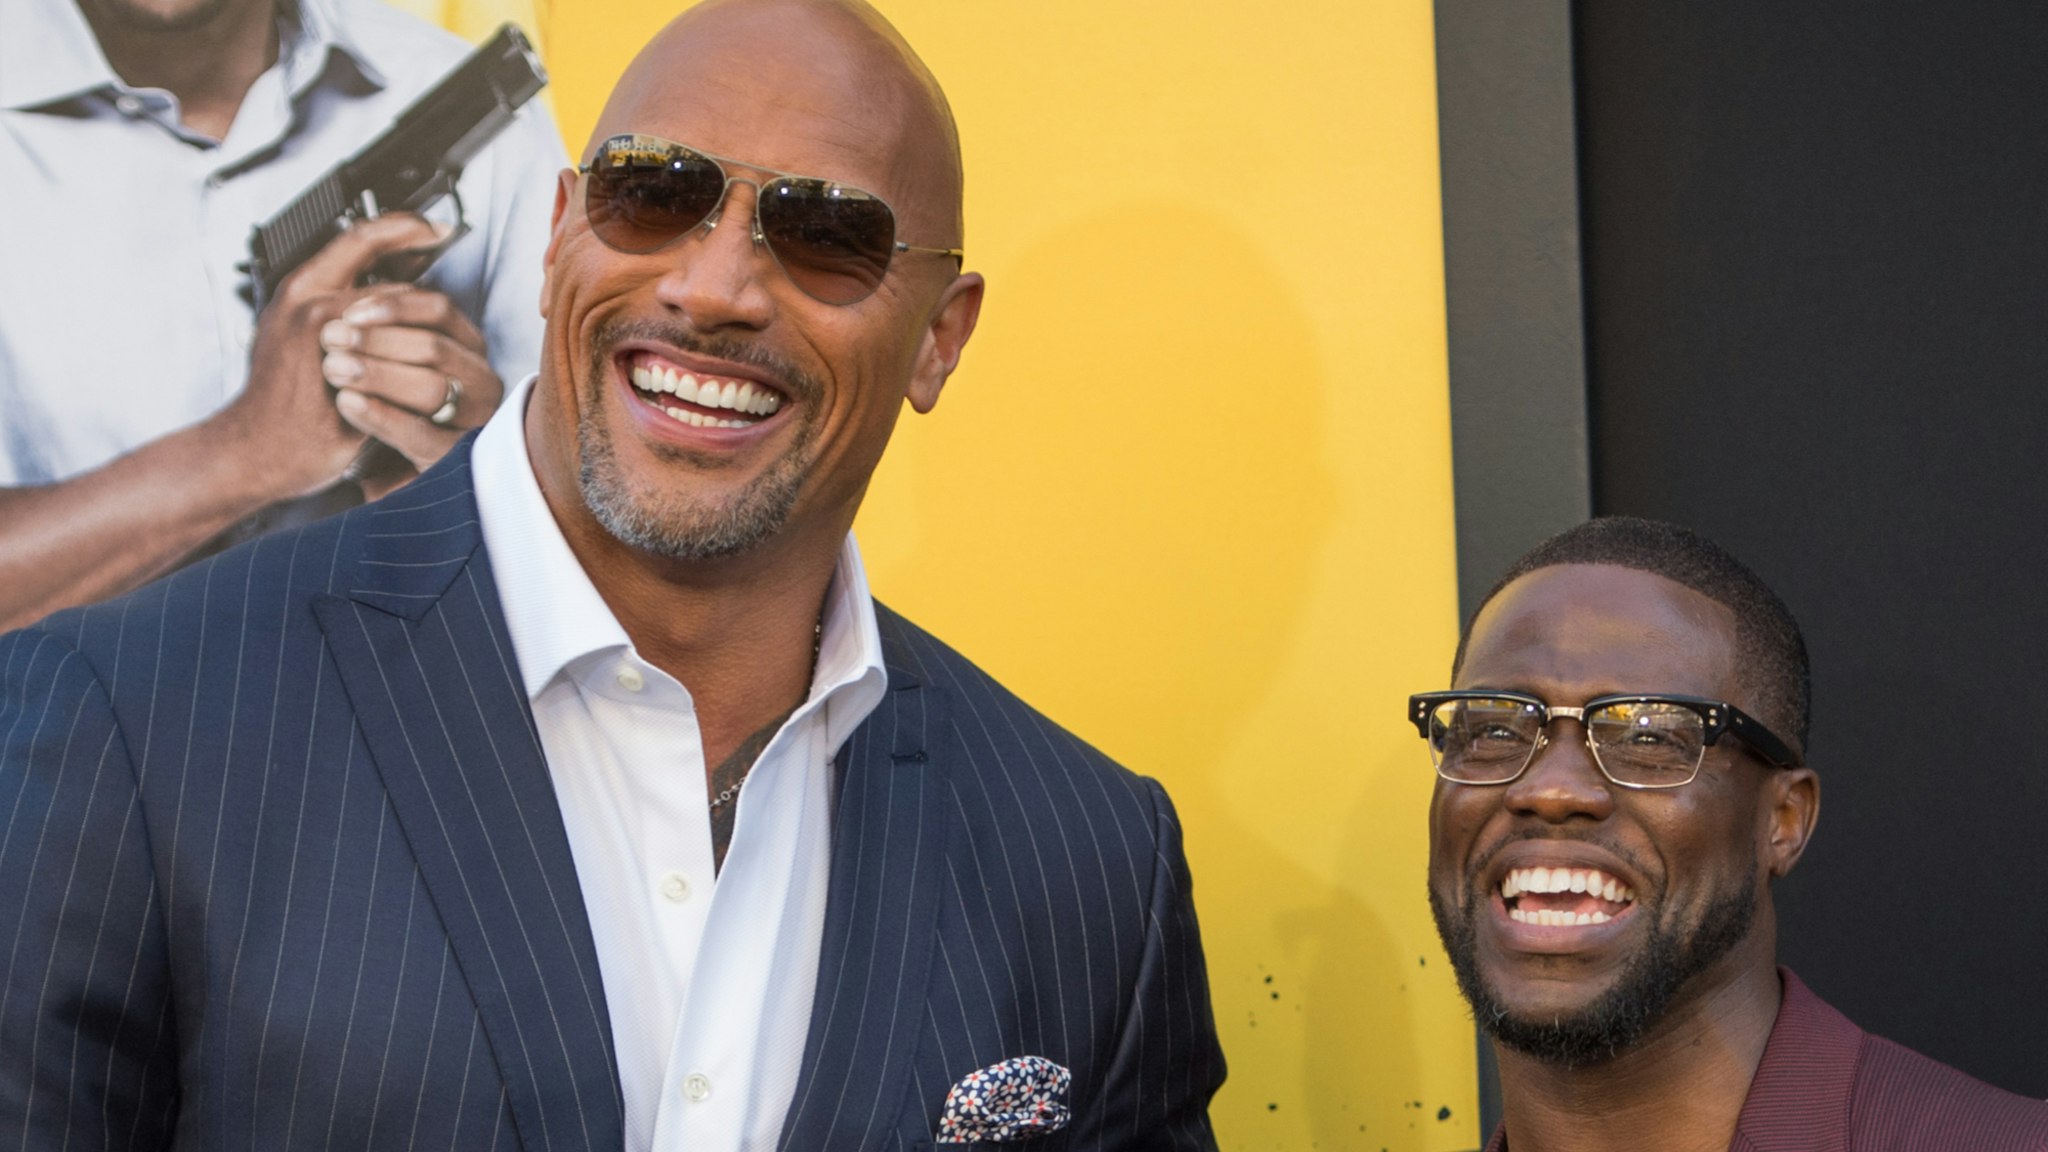 Actors Dwayne Johnson and Kevin Hart attend the premiere of Warner Bros. Pictures' "Central Intelligence" at Westwood Village Theatre on June 10, 2016 in Westwood, California.